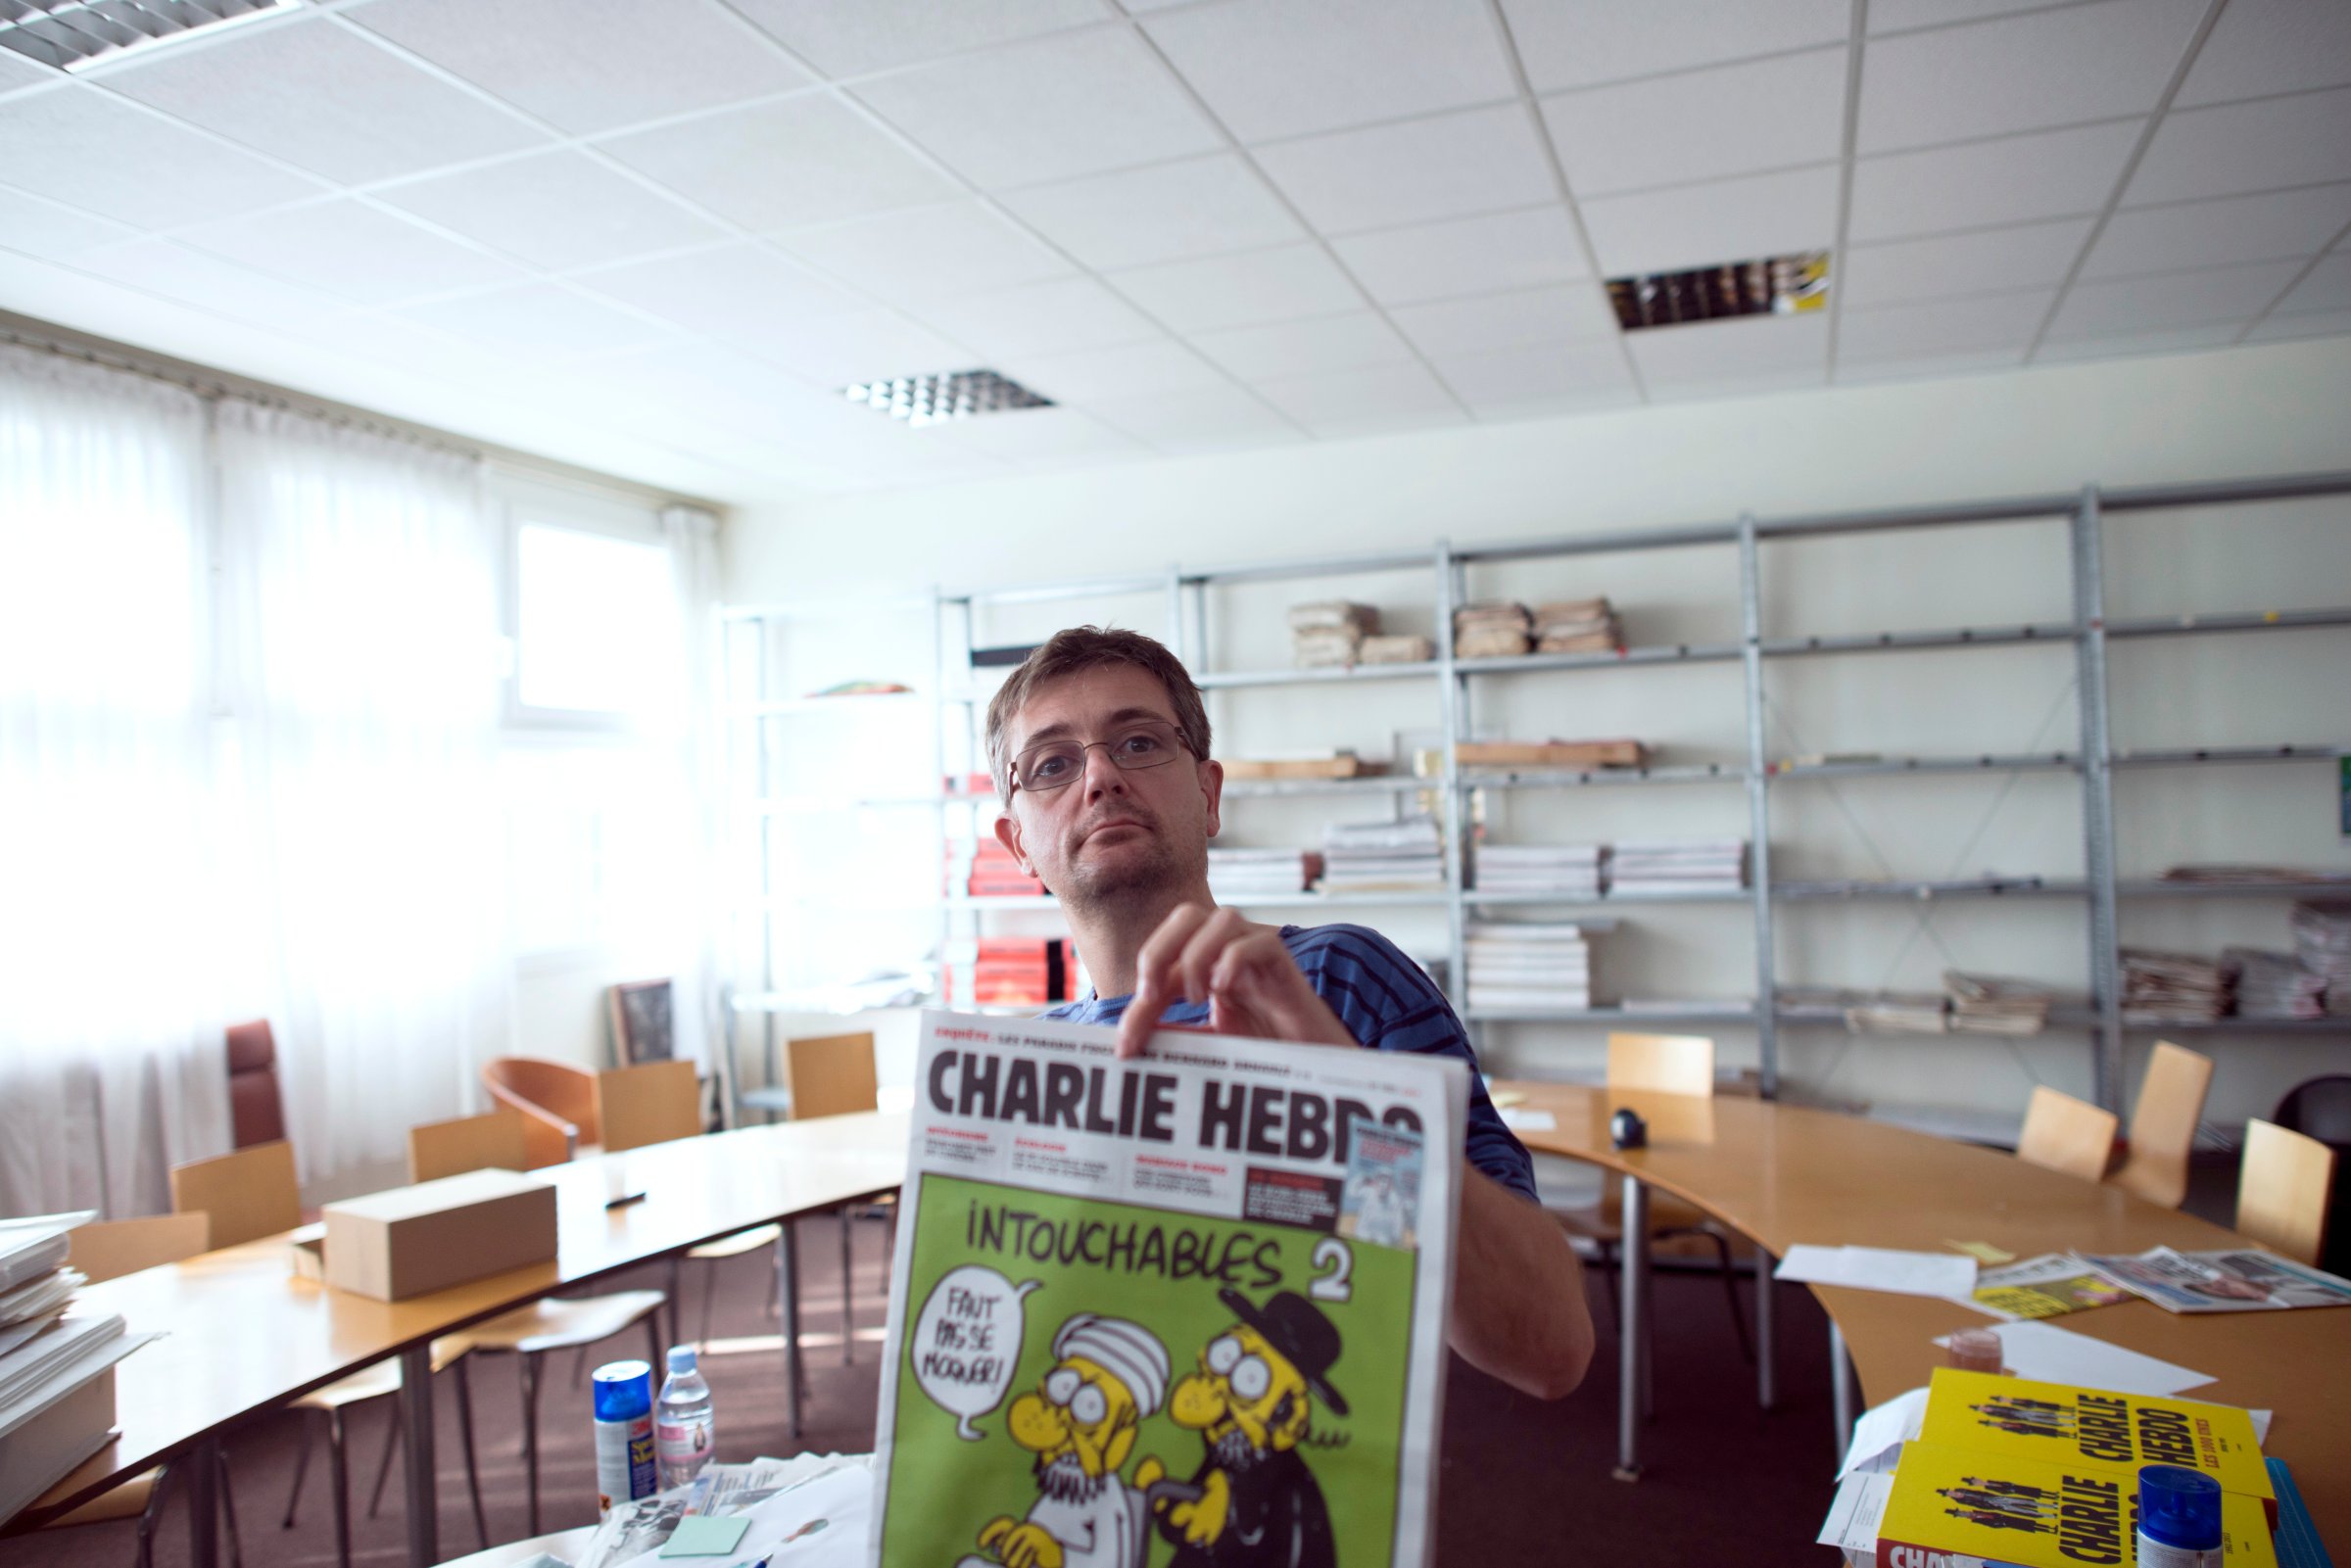 French satirical weekly Charlie Hebdo's publisher and cartoonist presents to journalists the last issue which features on the front cover a satirical drawing titled "Intouchables 2" in Paris on Sep. 19, 2012.